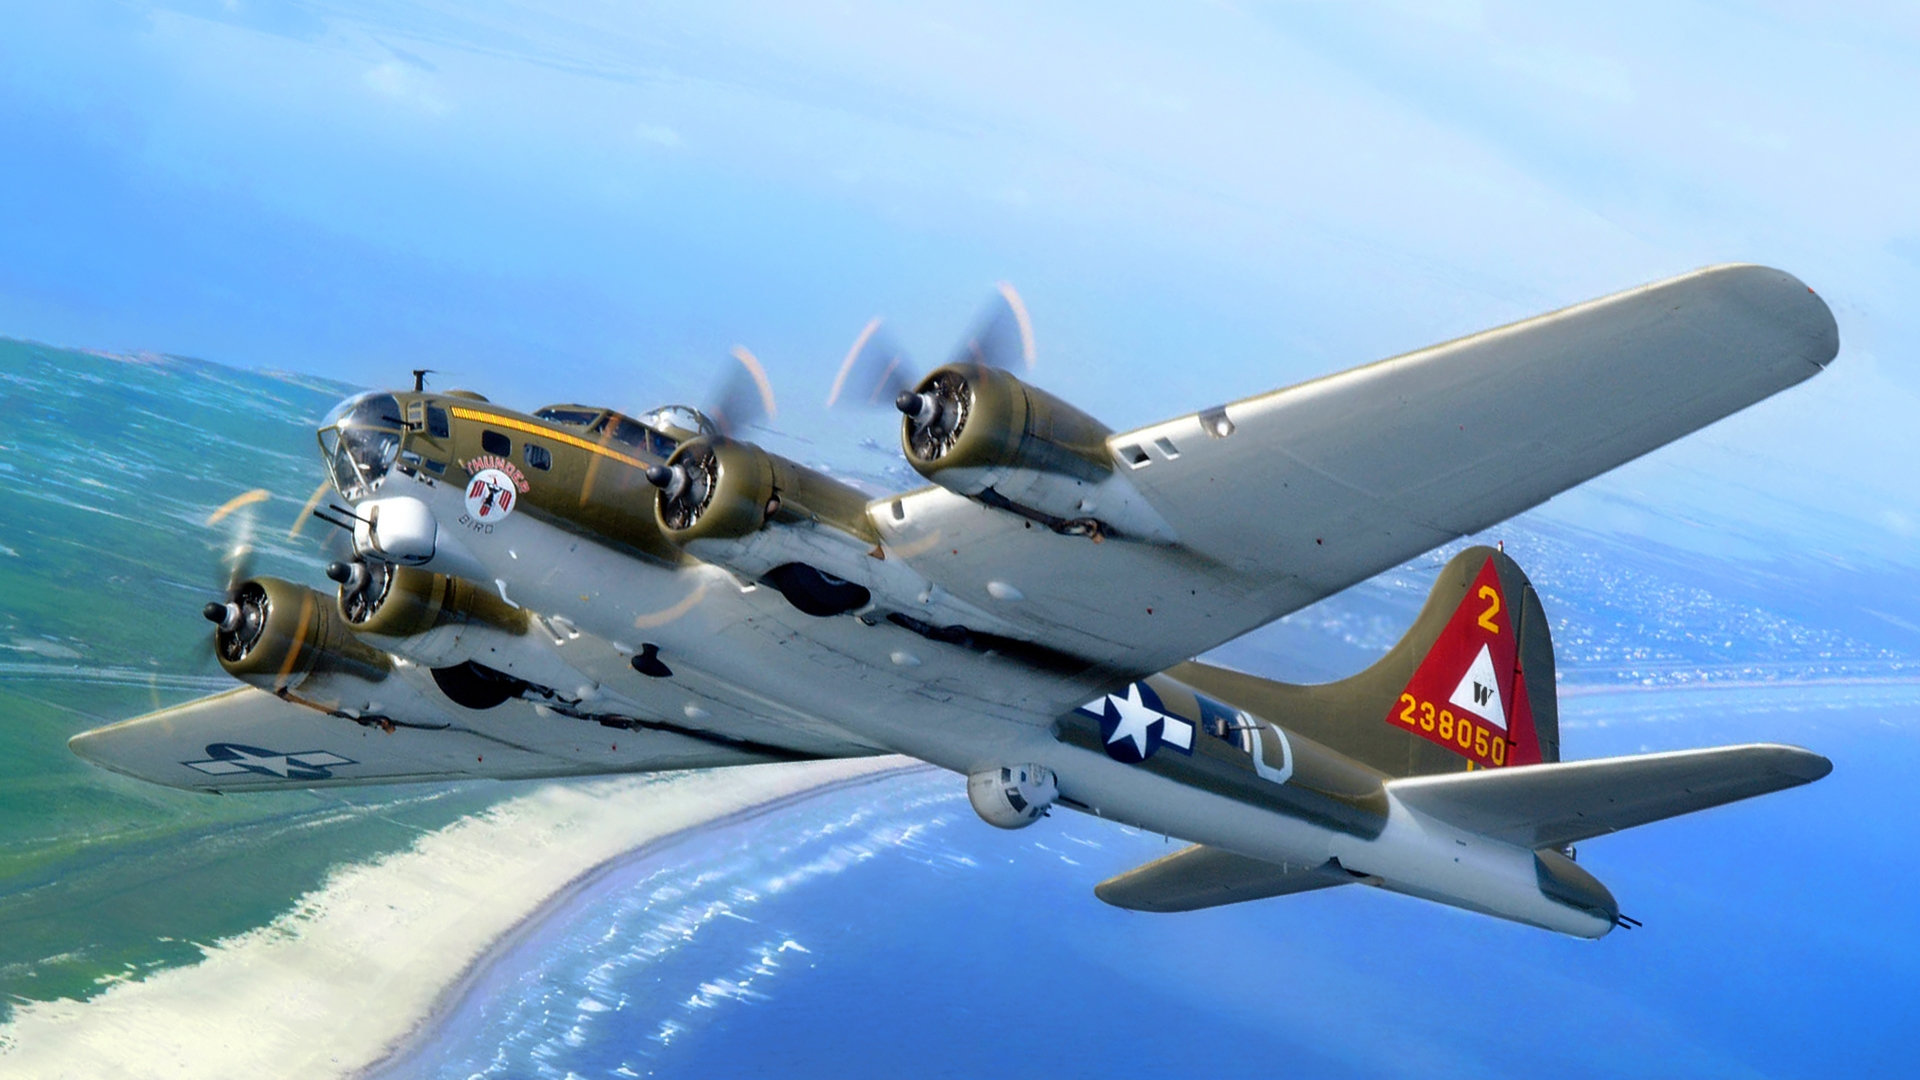 Best Boeing B-17 Flying Fortress wallpaper ID:214171 for High Resolution full hd computer